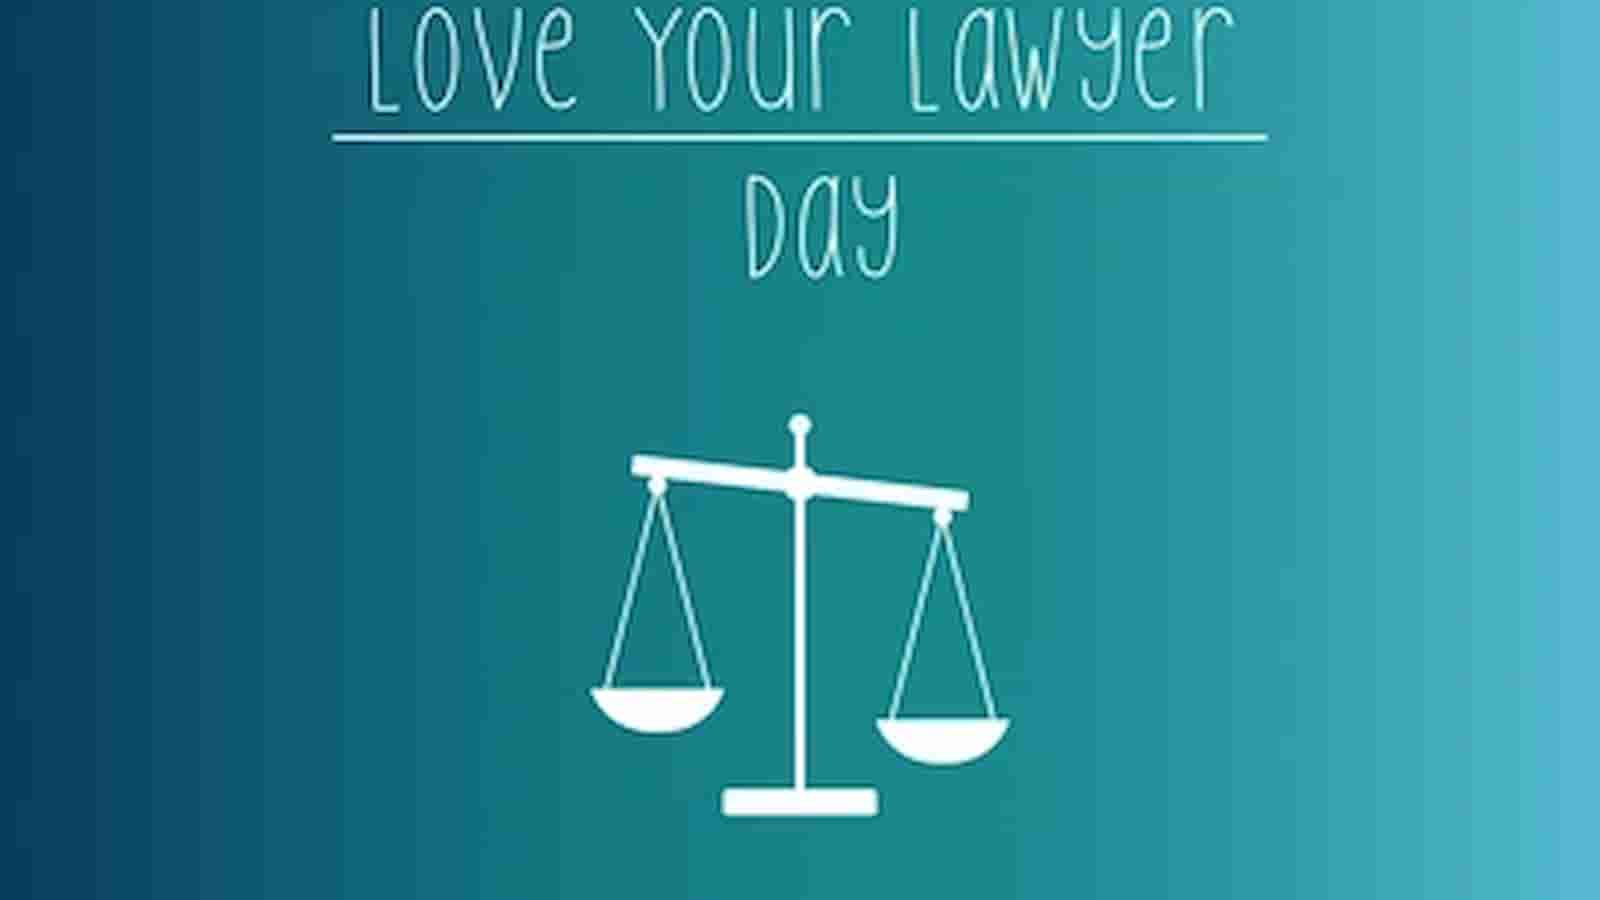 Love Your Lawyer Day